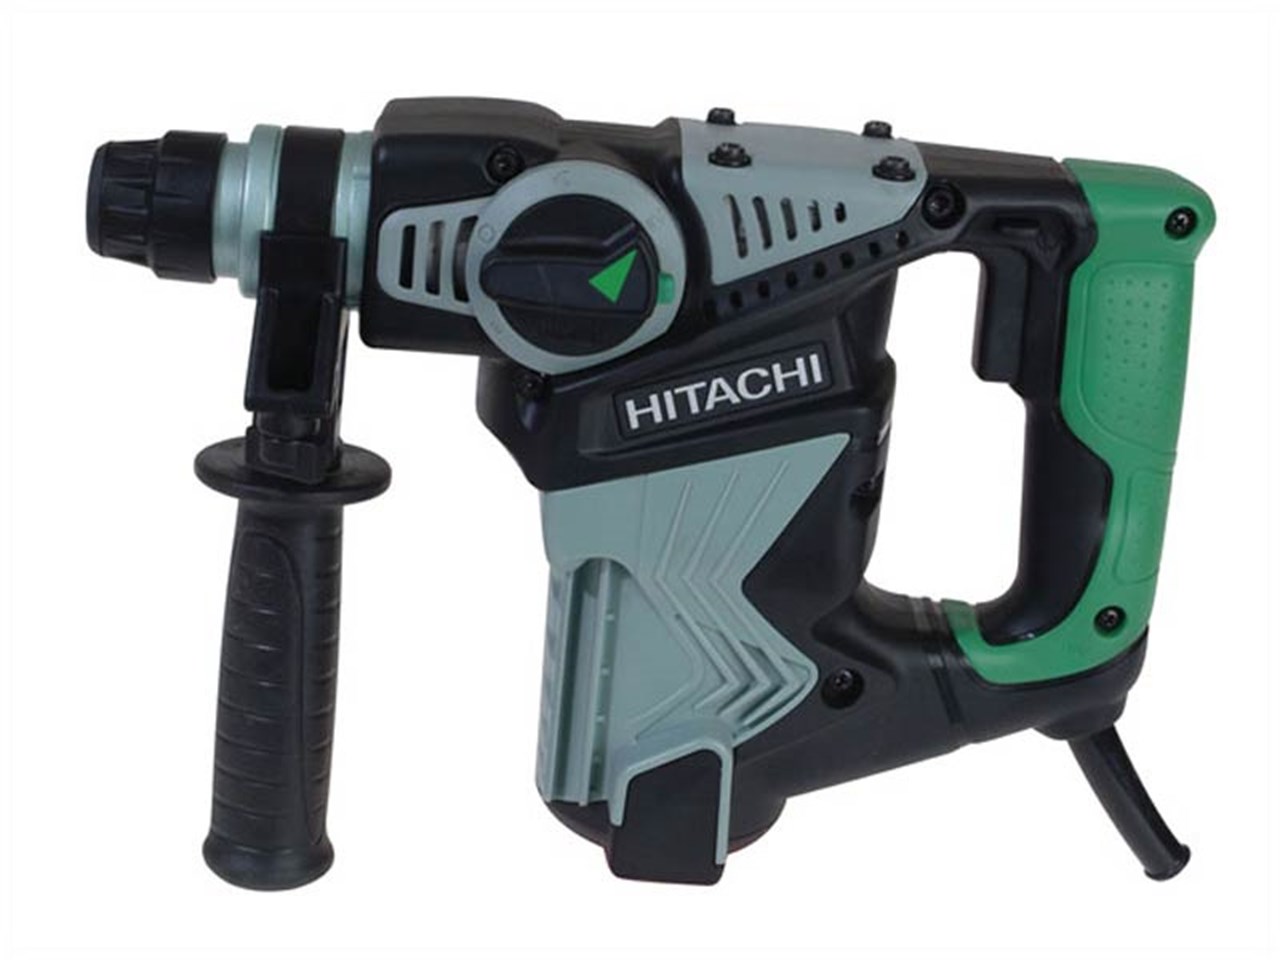 Hitachi DV18DJL(LP) 3 Mode Rotary/Hammer Drill with SDS (850w)